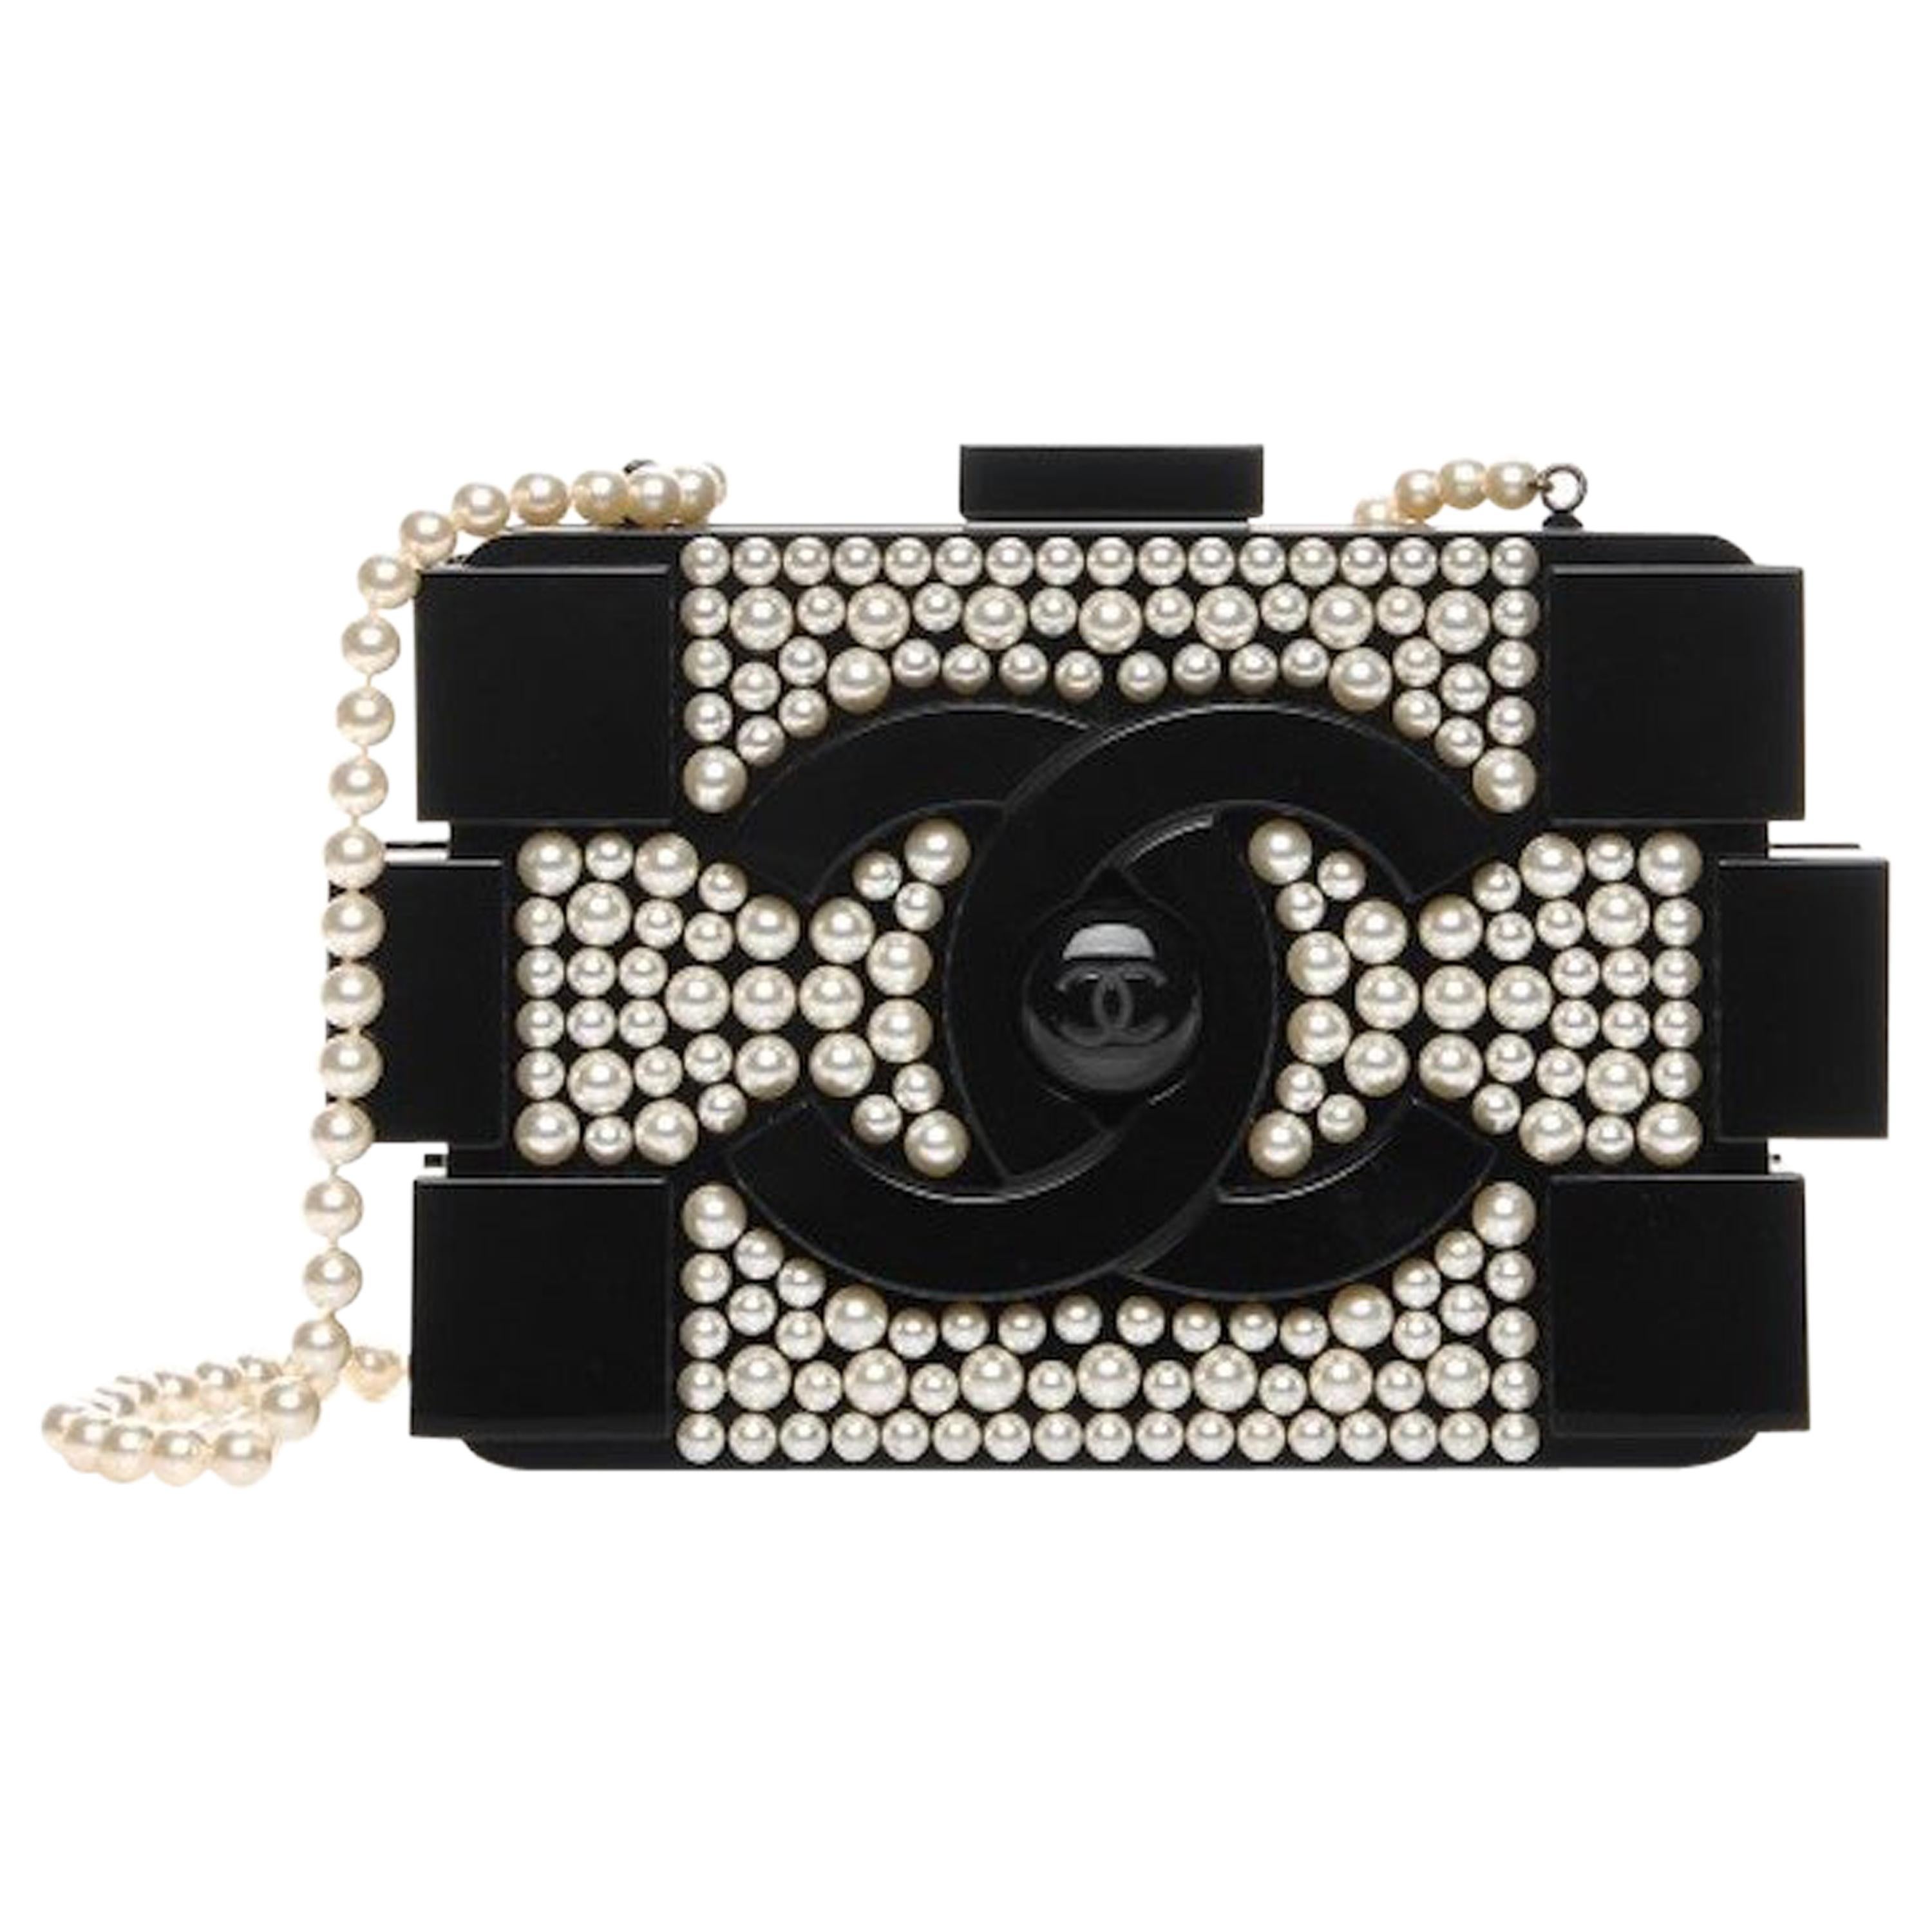 CHANEL Resin Crystal Slot Machine Minaudiere Black Gold White Red 1265788